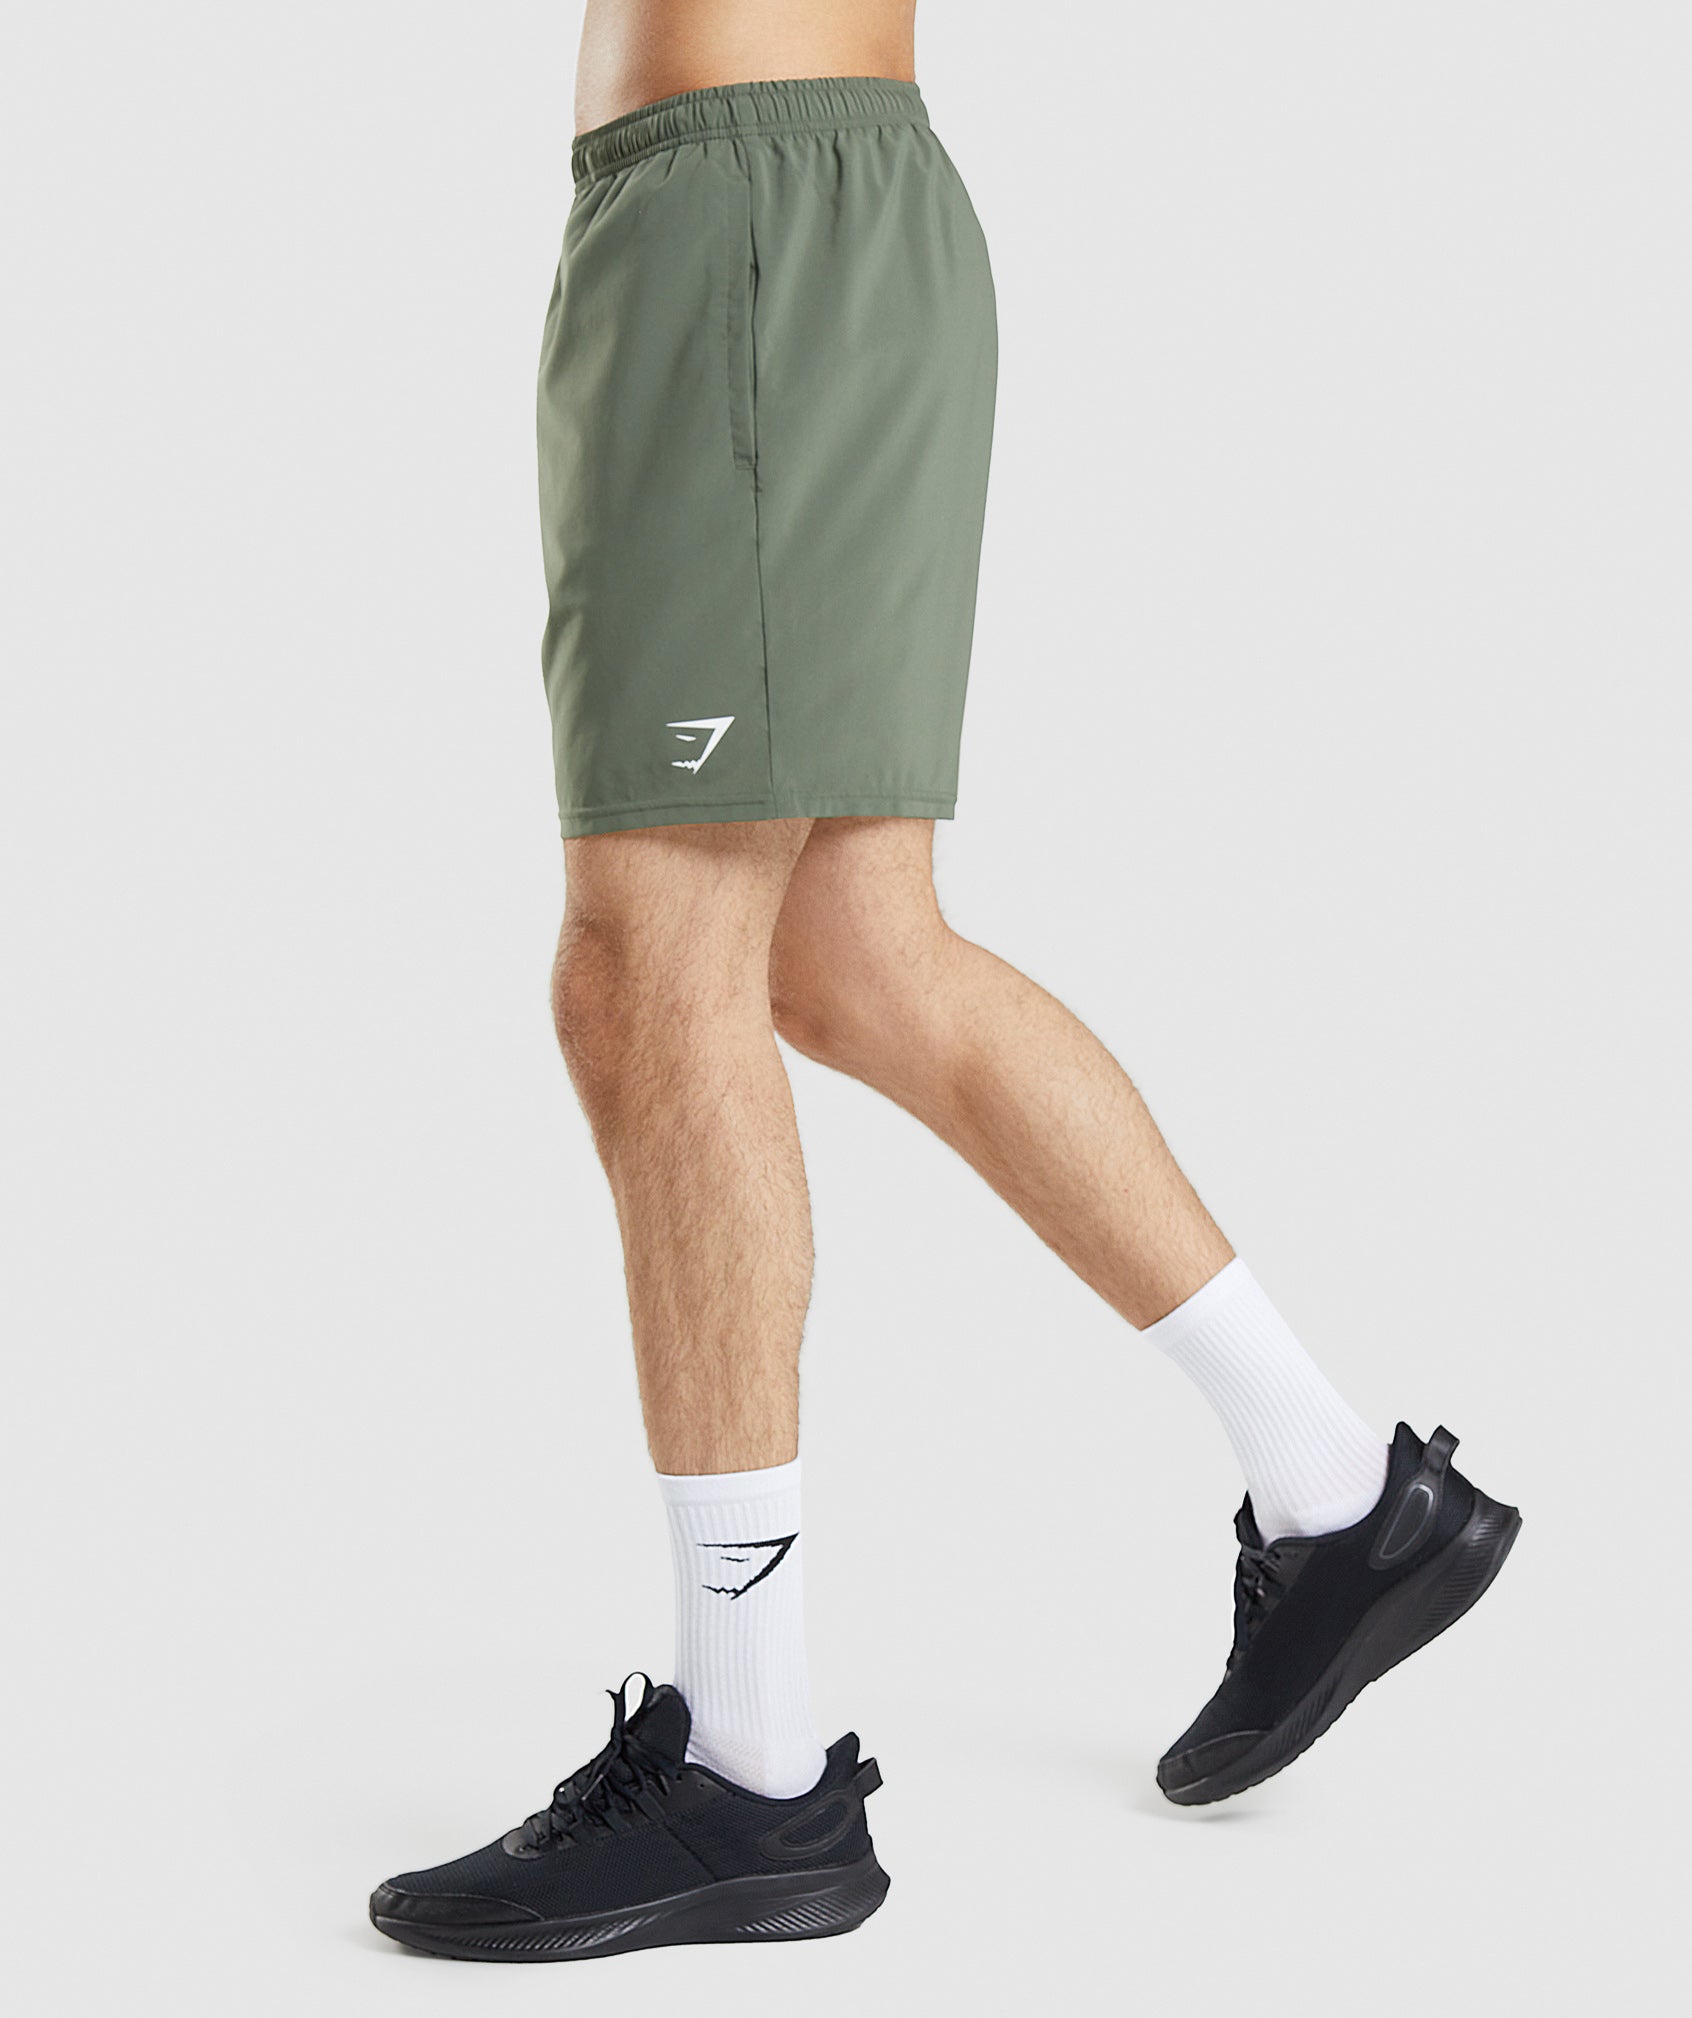 Arrival 7" Shorts in Green - view 3